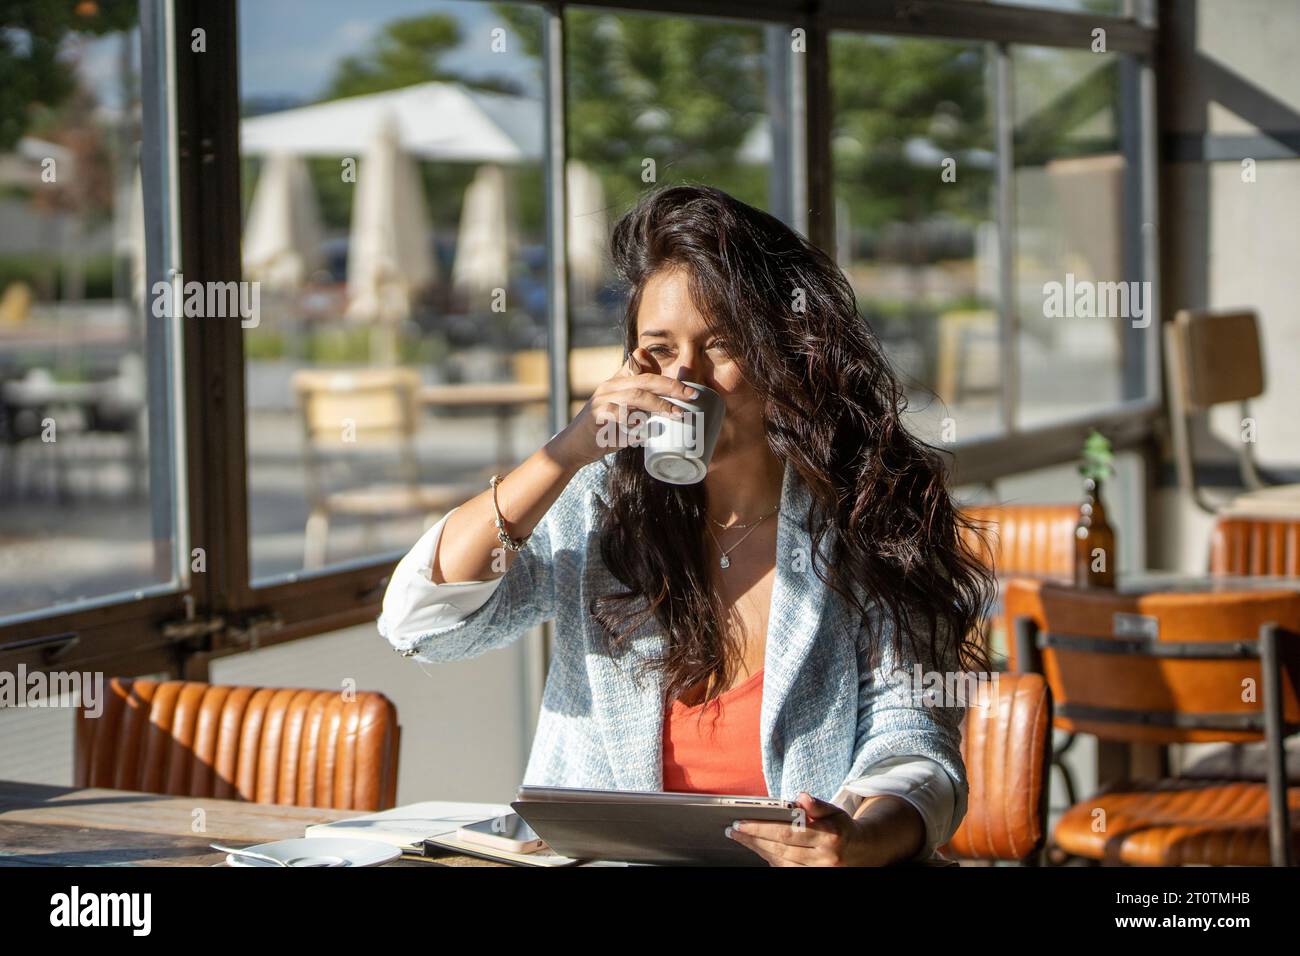 Woman drinking coffee and holding a digital tablet while sitting in coffee shop. Technology concept. Stock Photo